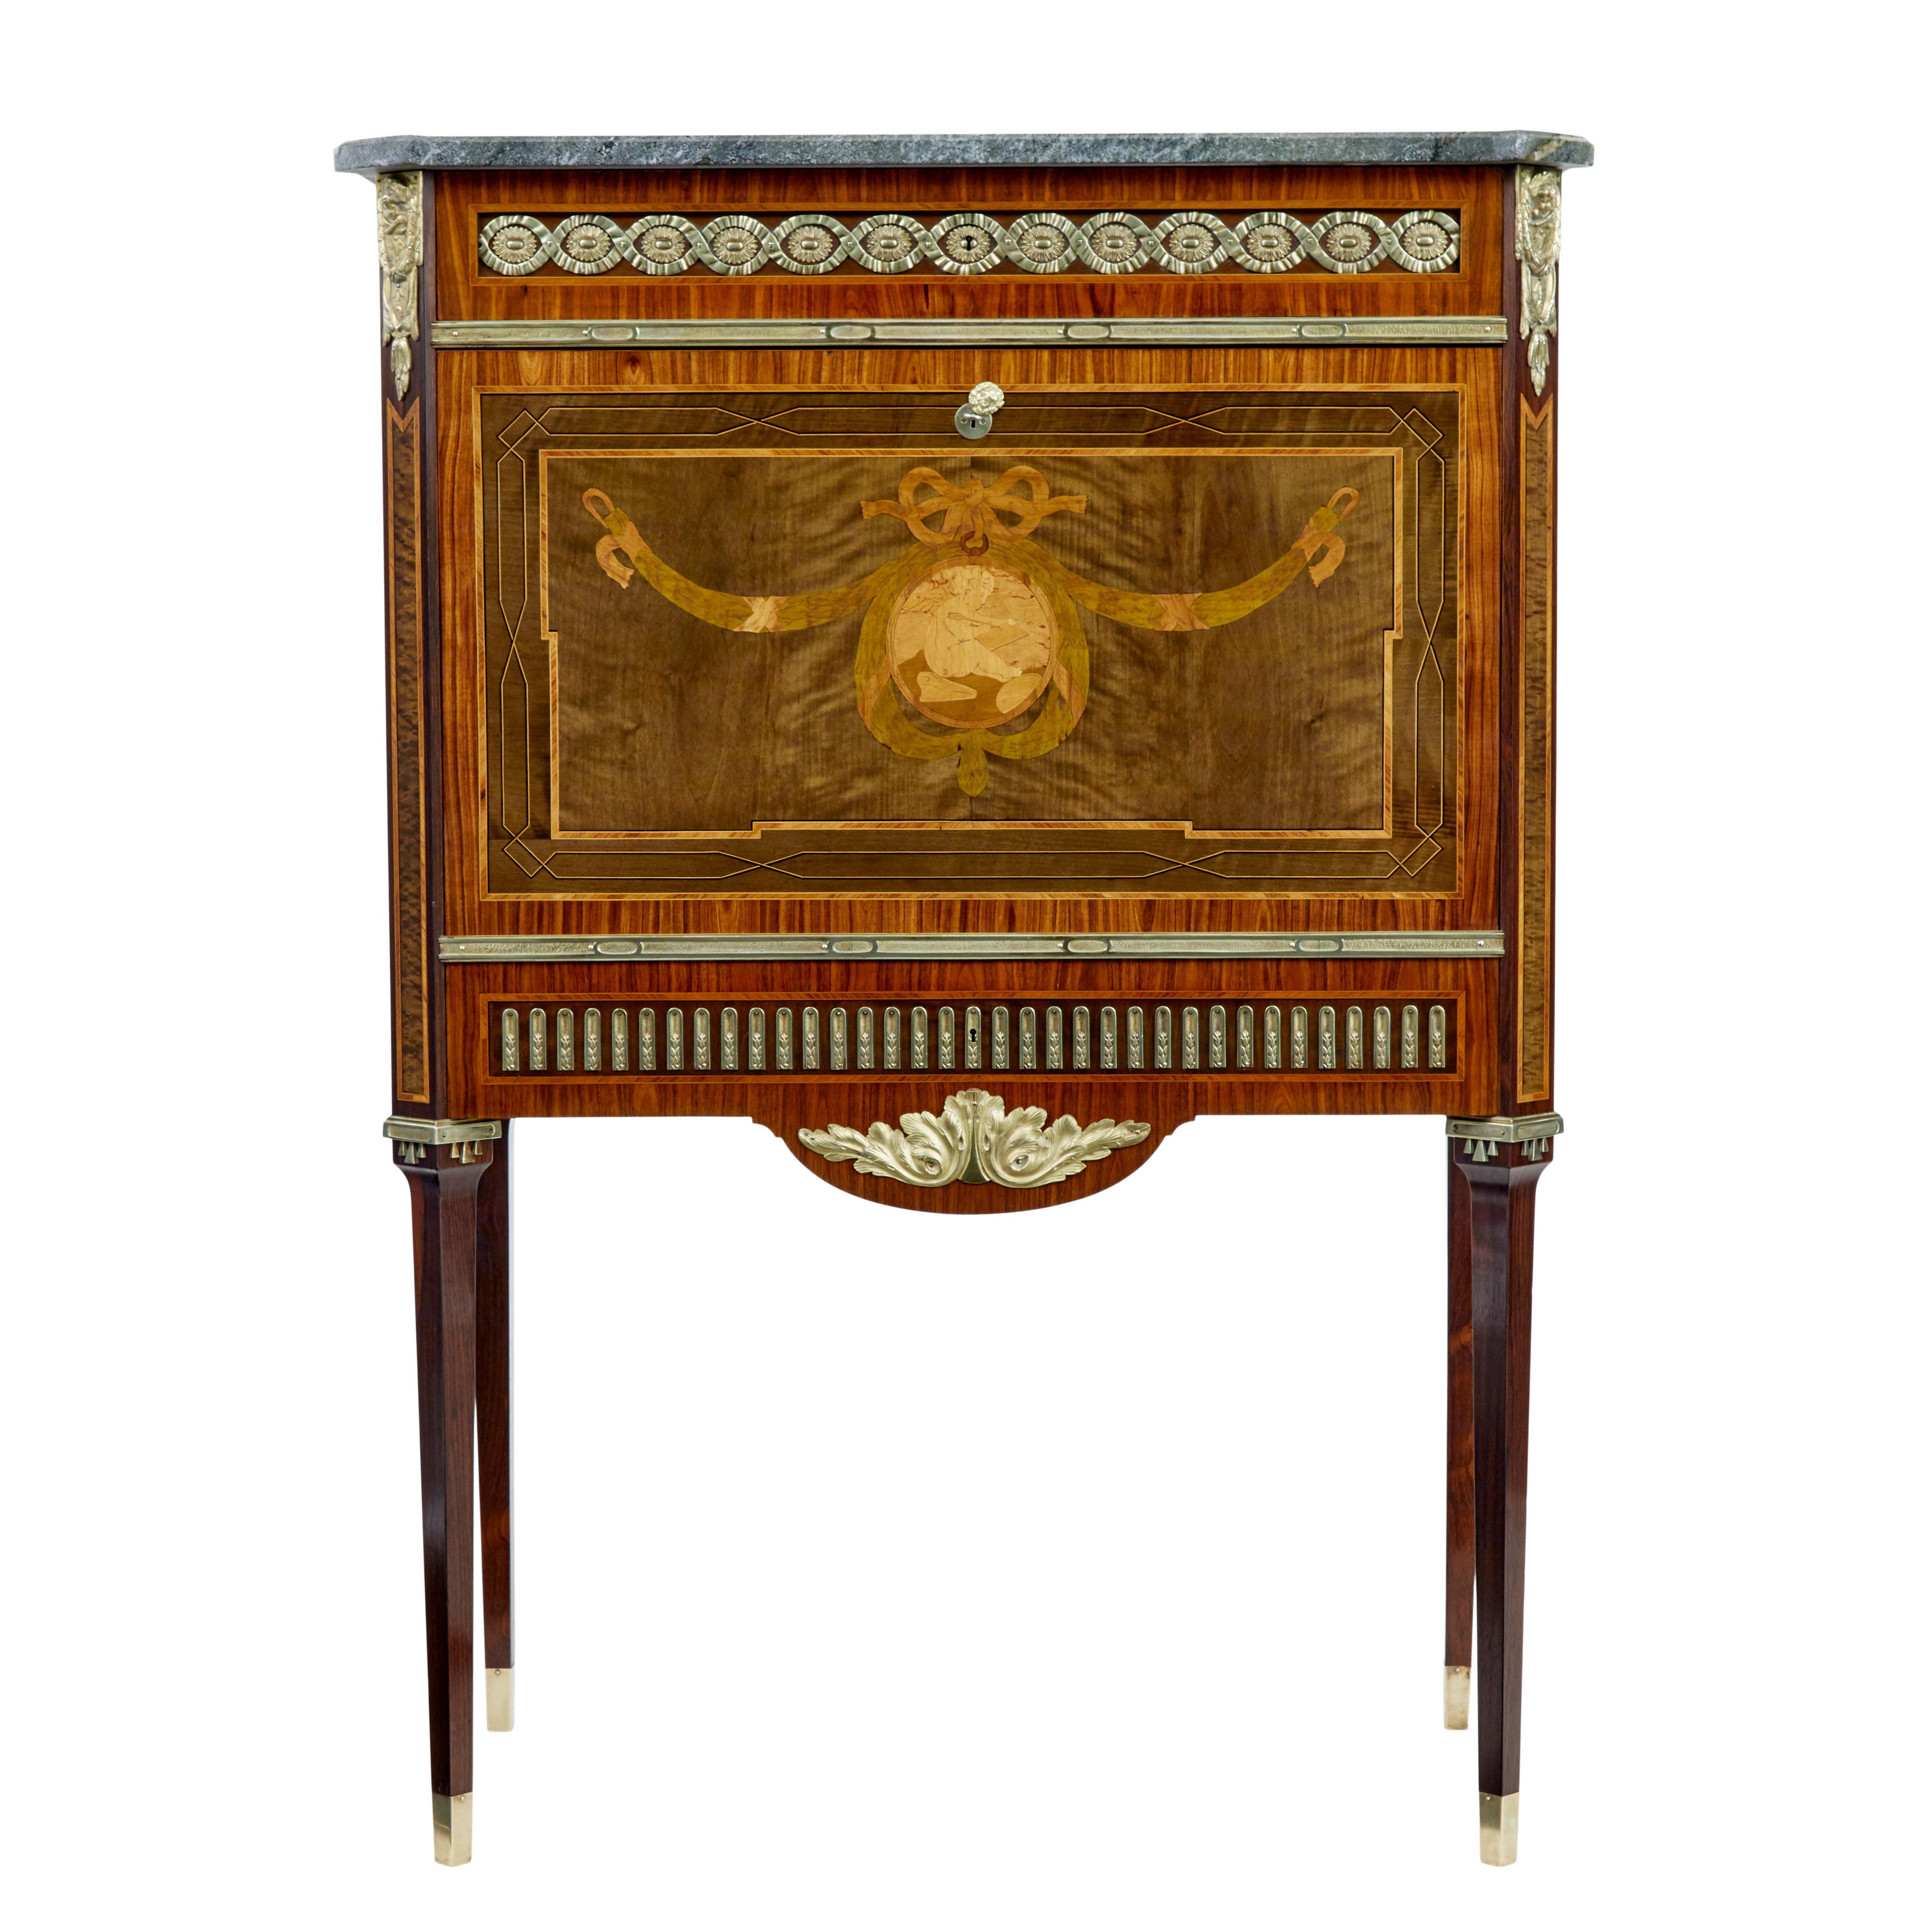 Good quality inlaid secretaire circa 1930.

Over-sailing grey marble top with canted corners.  Single drawer below the top surface cross banded and with ormolu mounts.  Profusely inlaid fall drops down to a writing height of 28 3/4